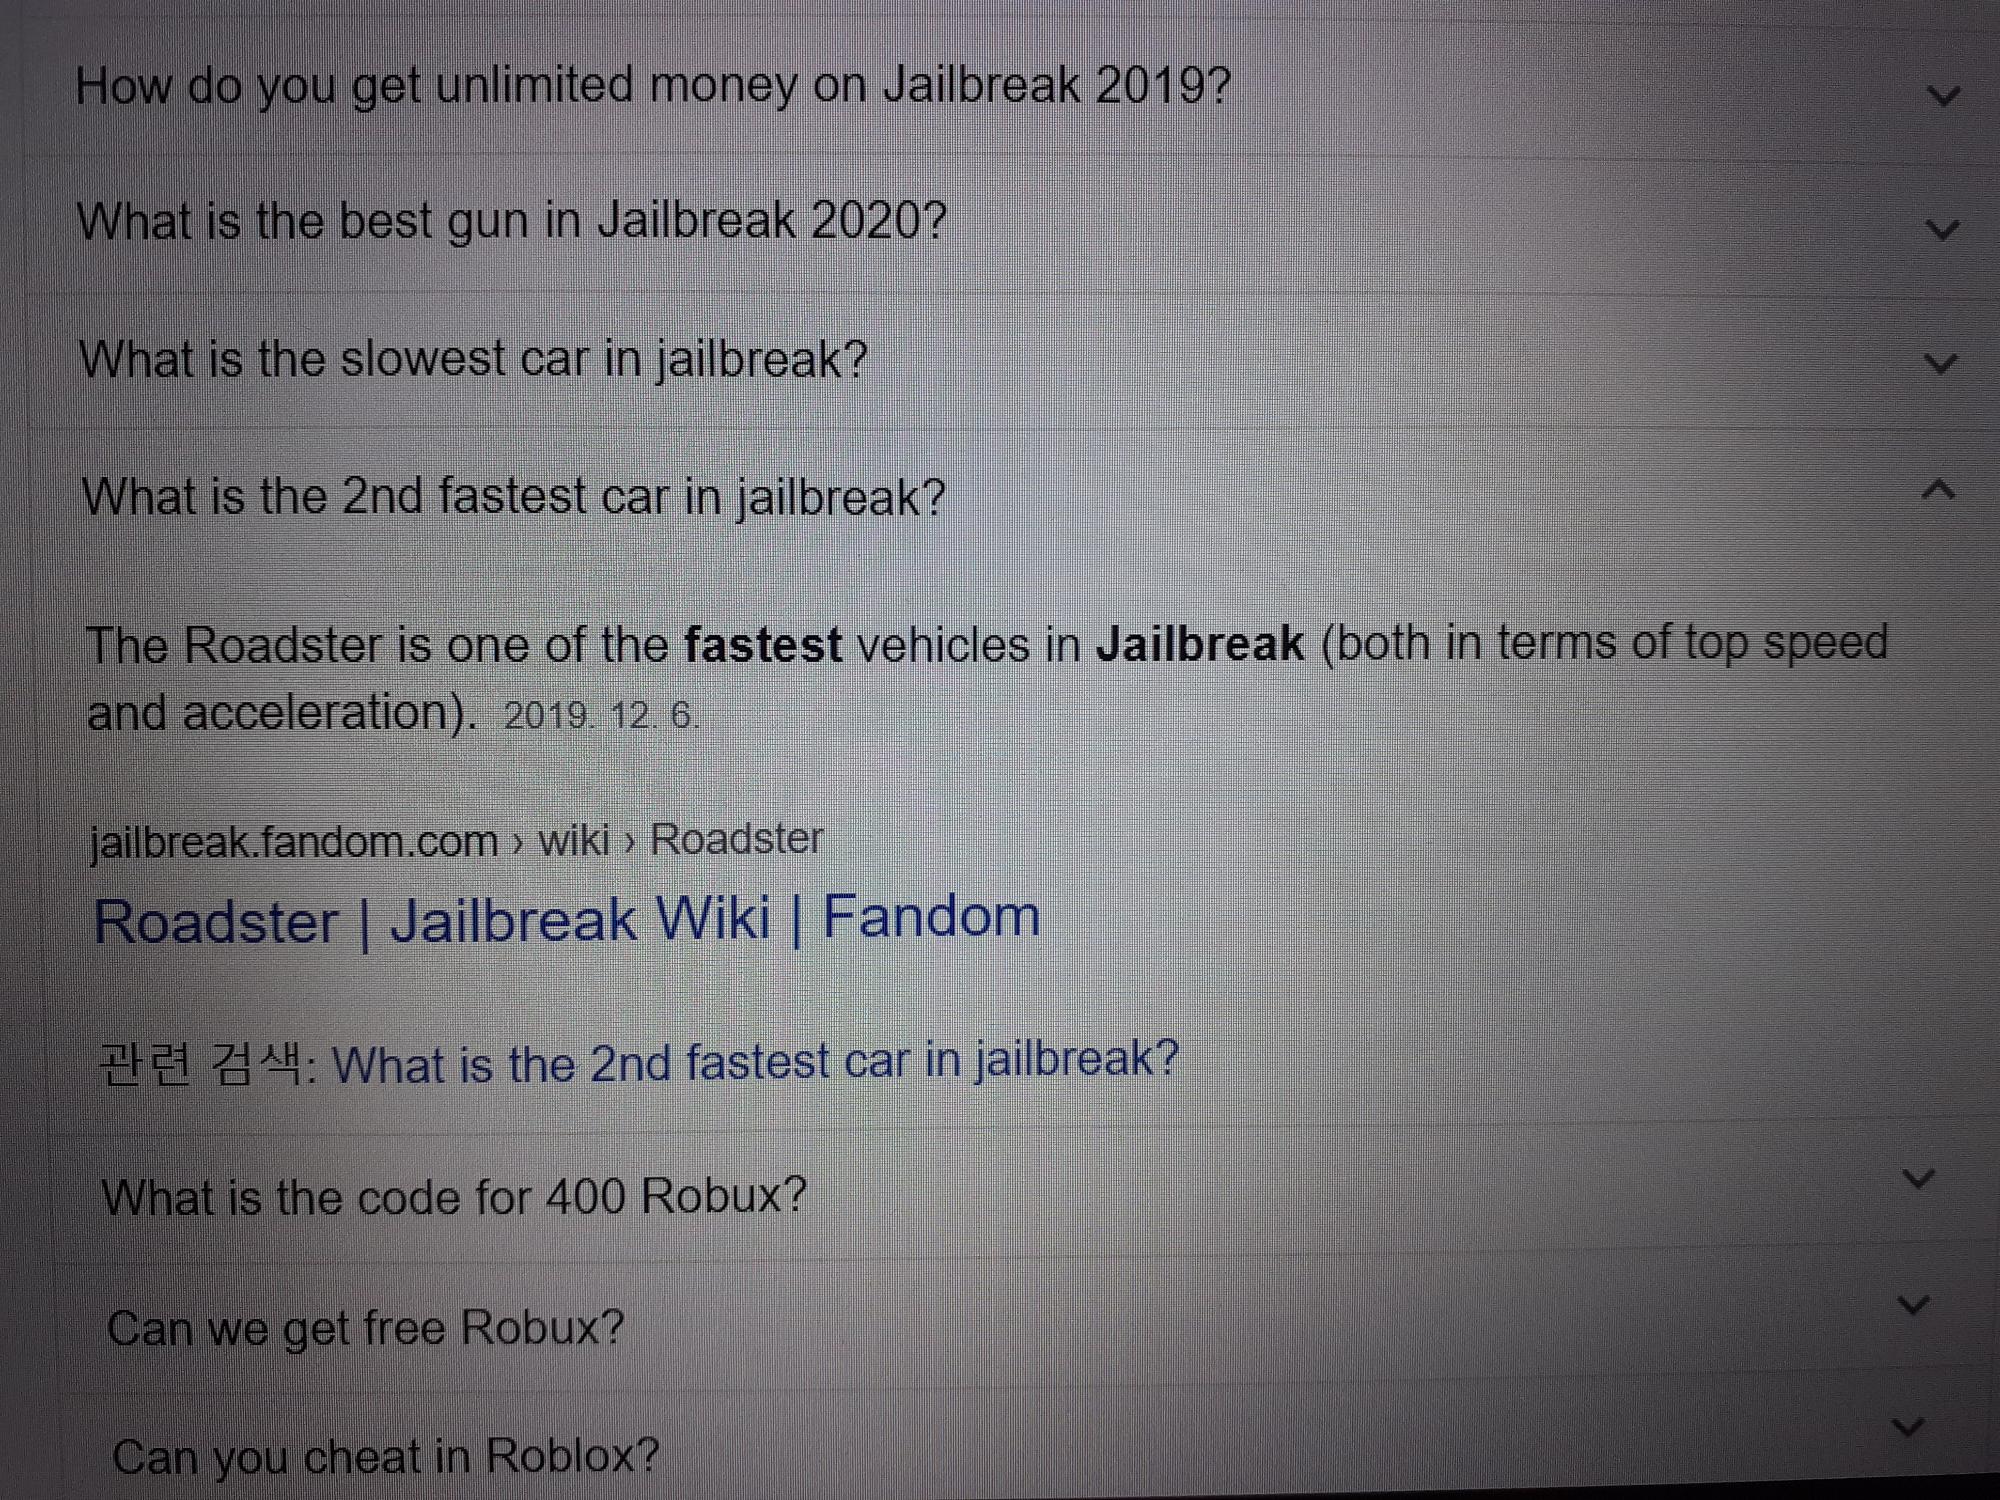 Seriously 2nd Fastest Car Is Bugatti Fandom - how to get unlimited free jailbreak money roblox unlimited jailbreak money glitch